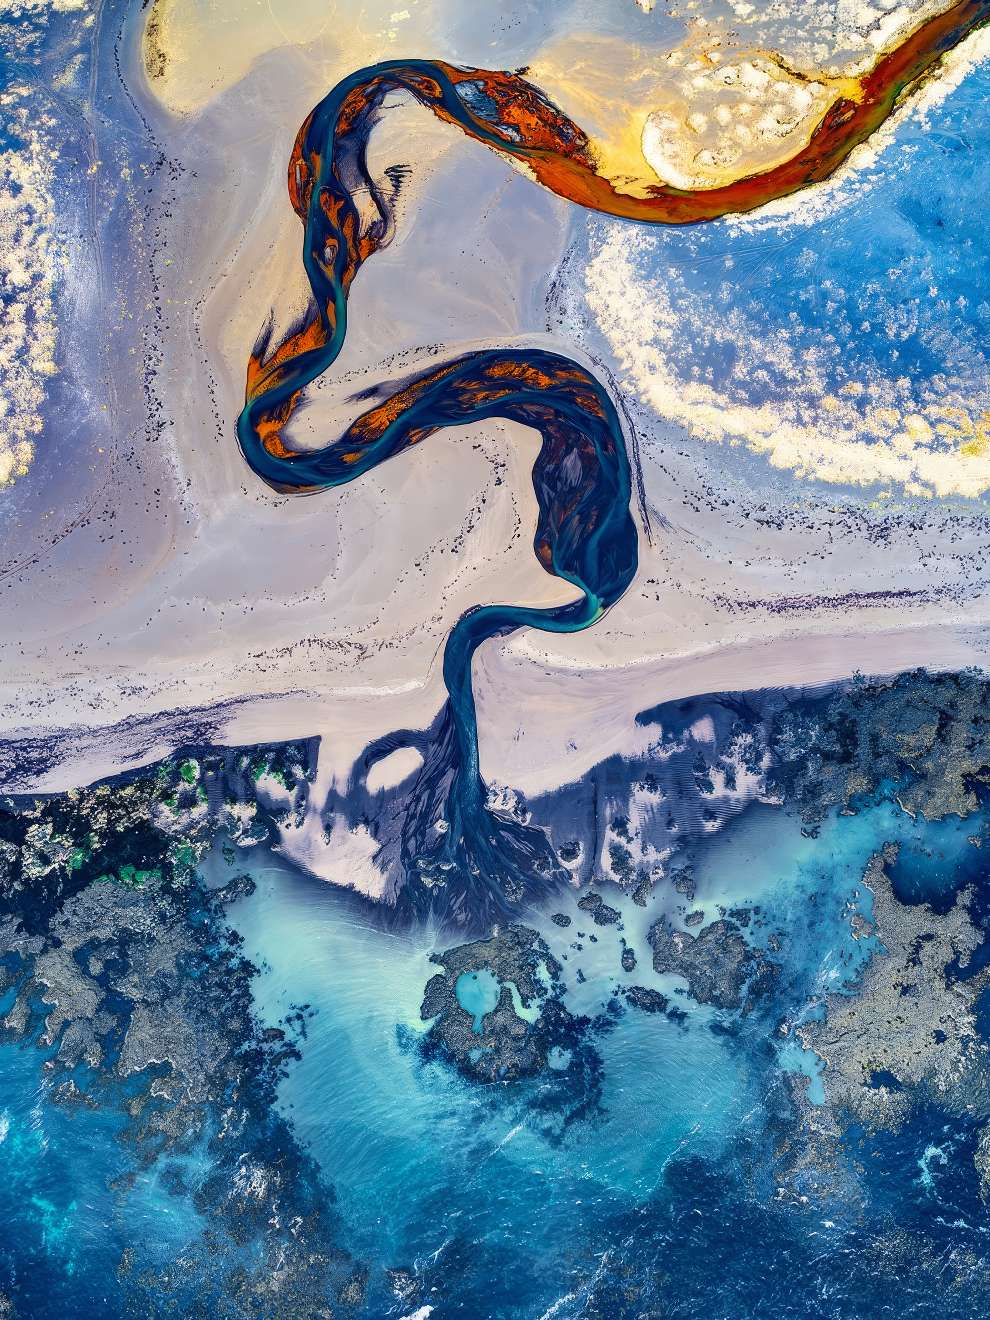 Abstract Drone Photo Awards Winner 03 